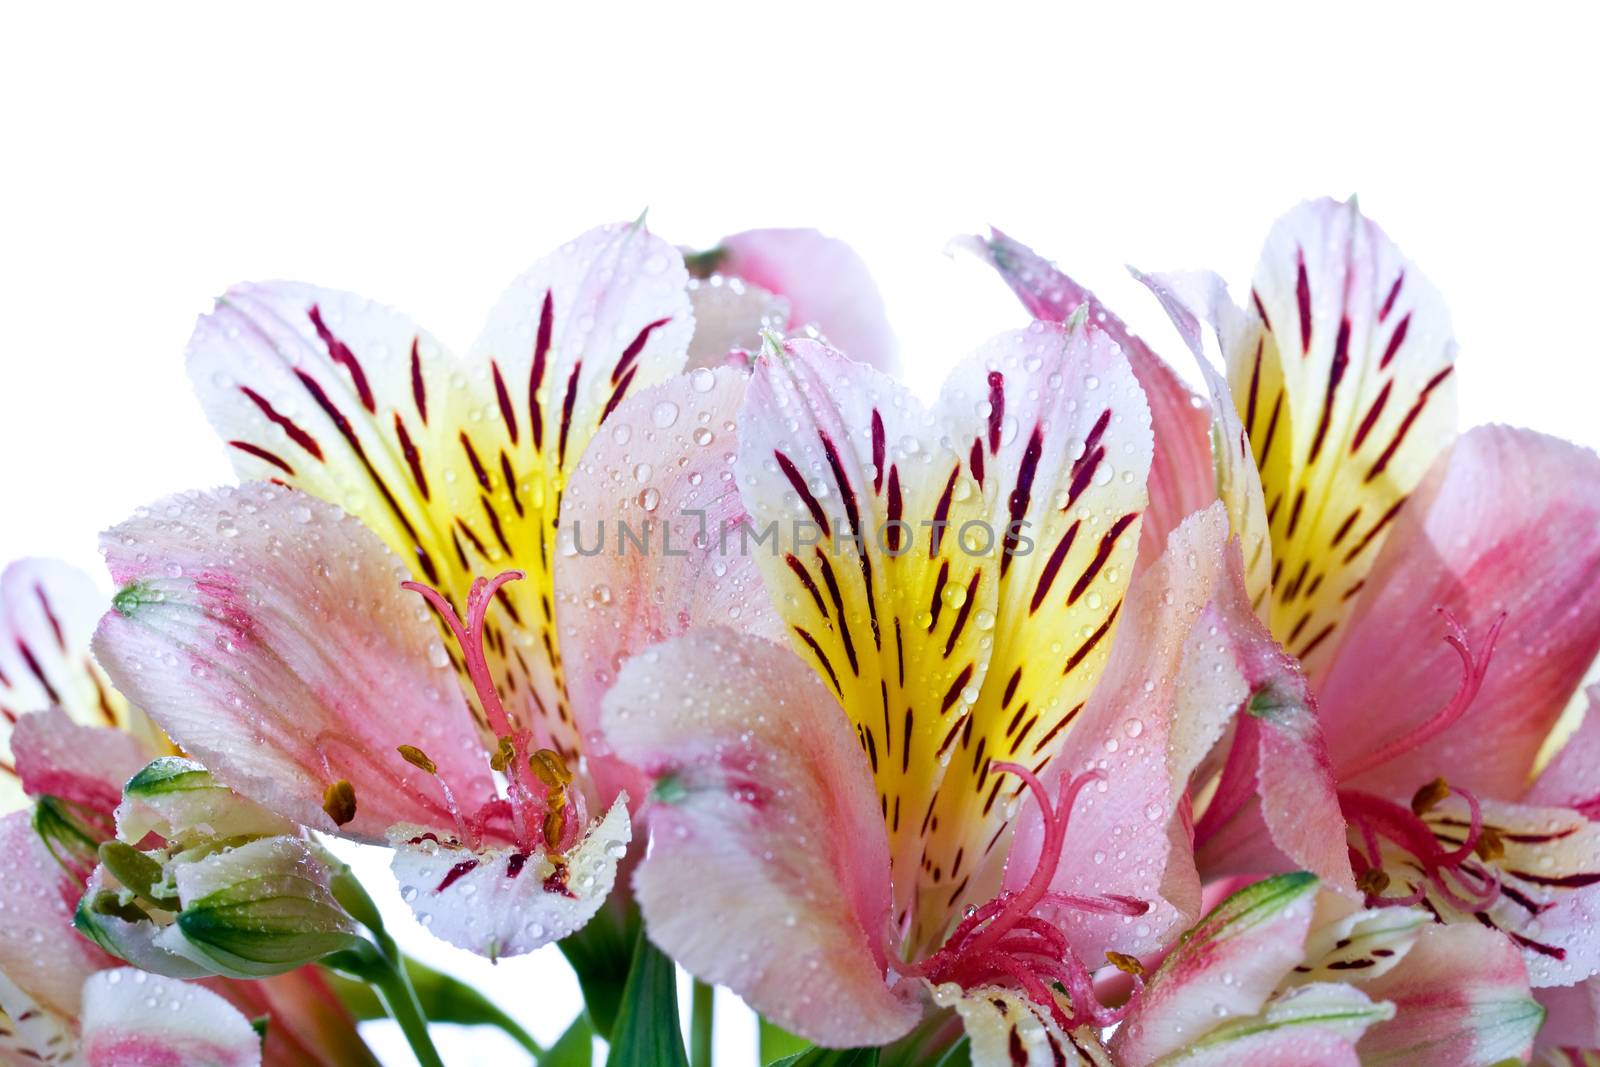 Alstroemeria closeup on white background with water droplets